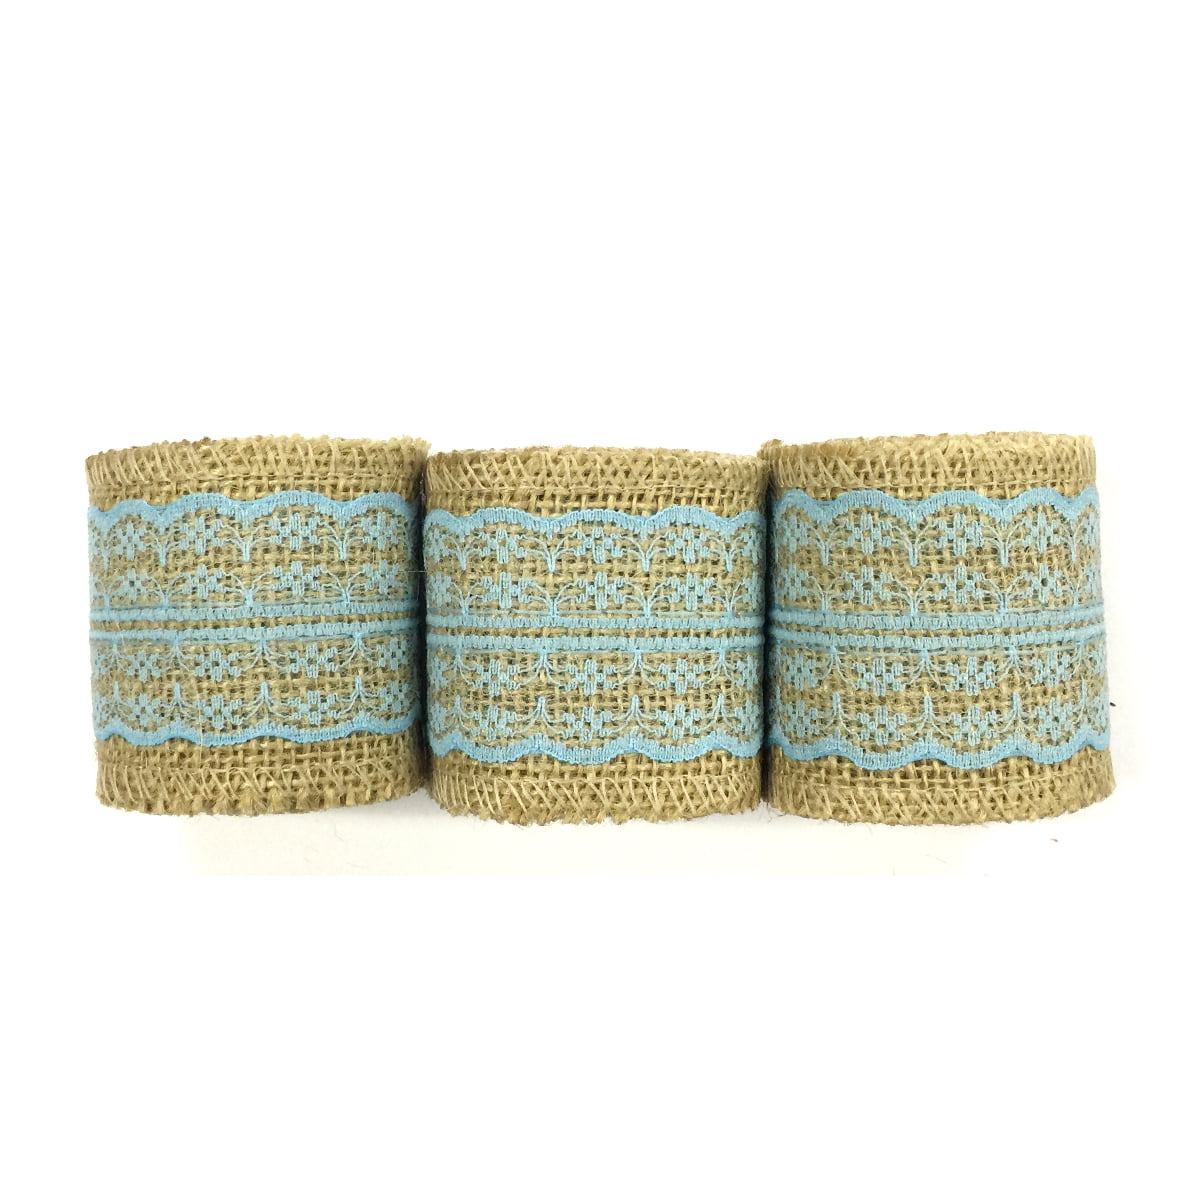 AK-Trading 2.5 Wide x 10 Yards Long Natural Burlap Craft Ribbon with Lace Jute Ribbon, Burlap Tape, Rustic Decor with Baby Blue Lace 